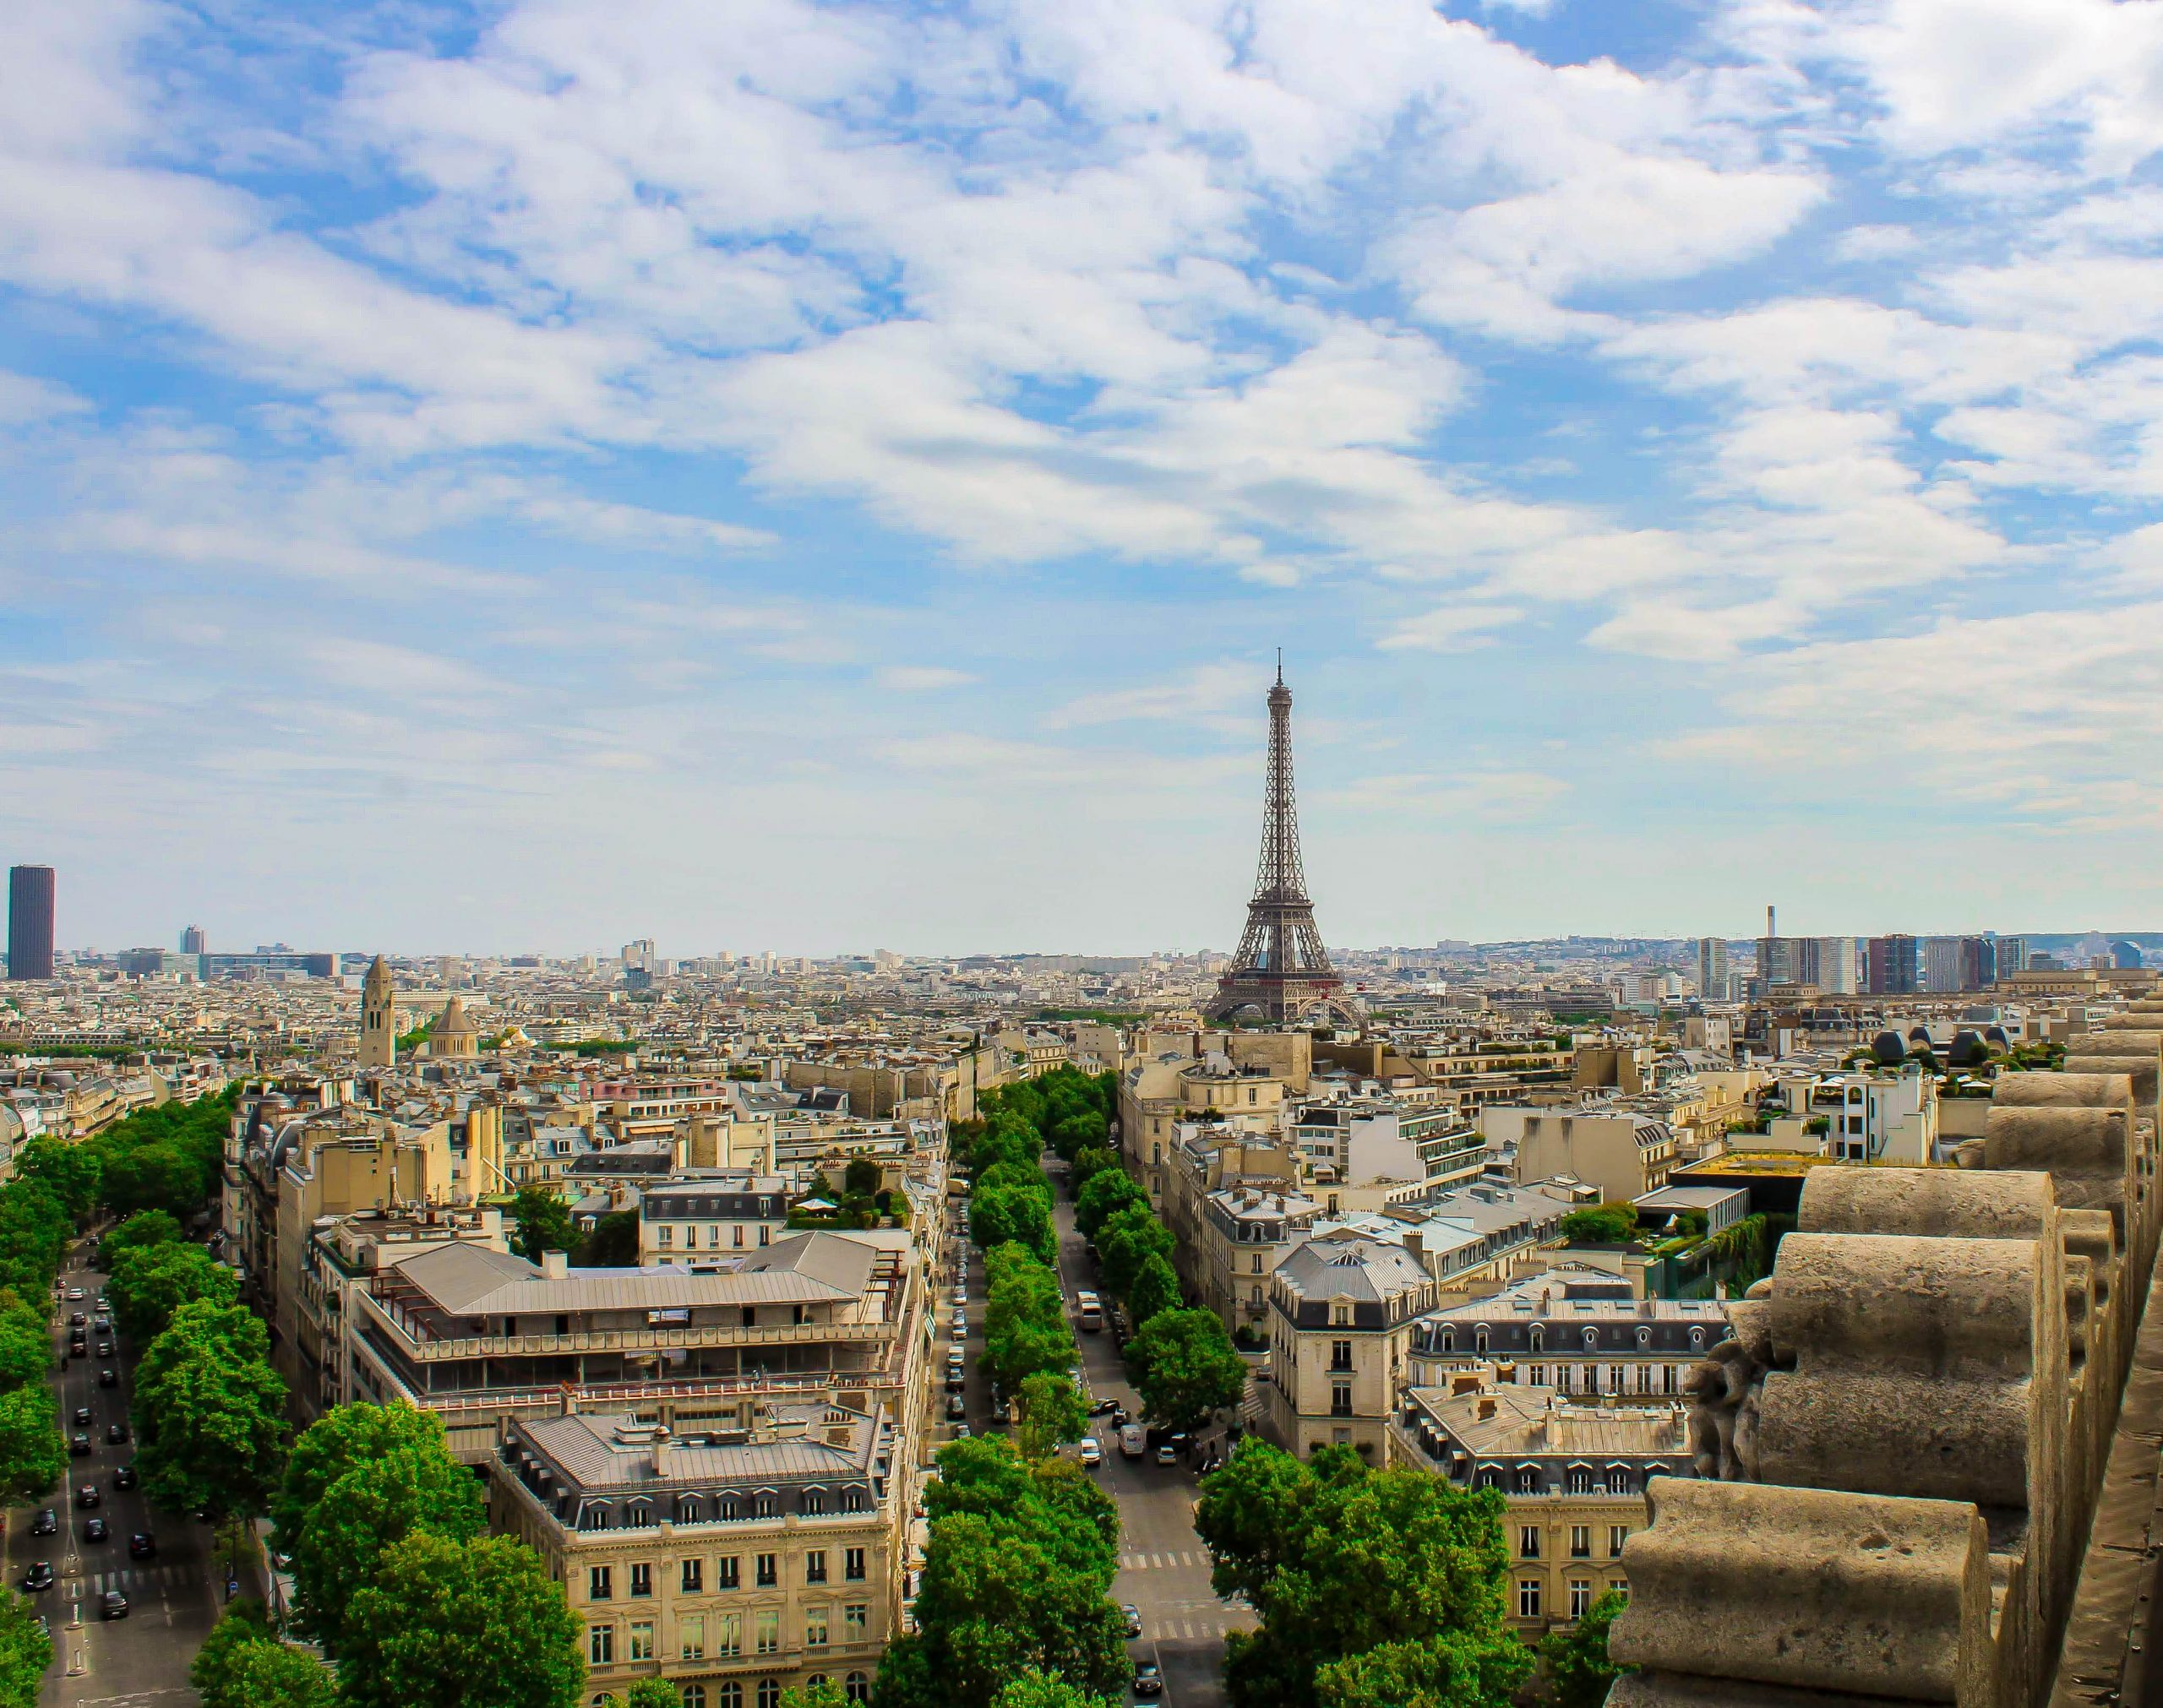 Paris guided tour : the city as you have never seen it before